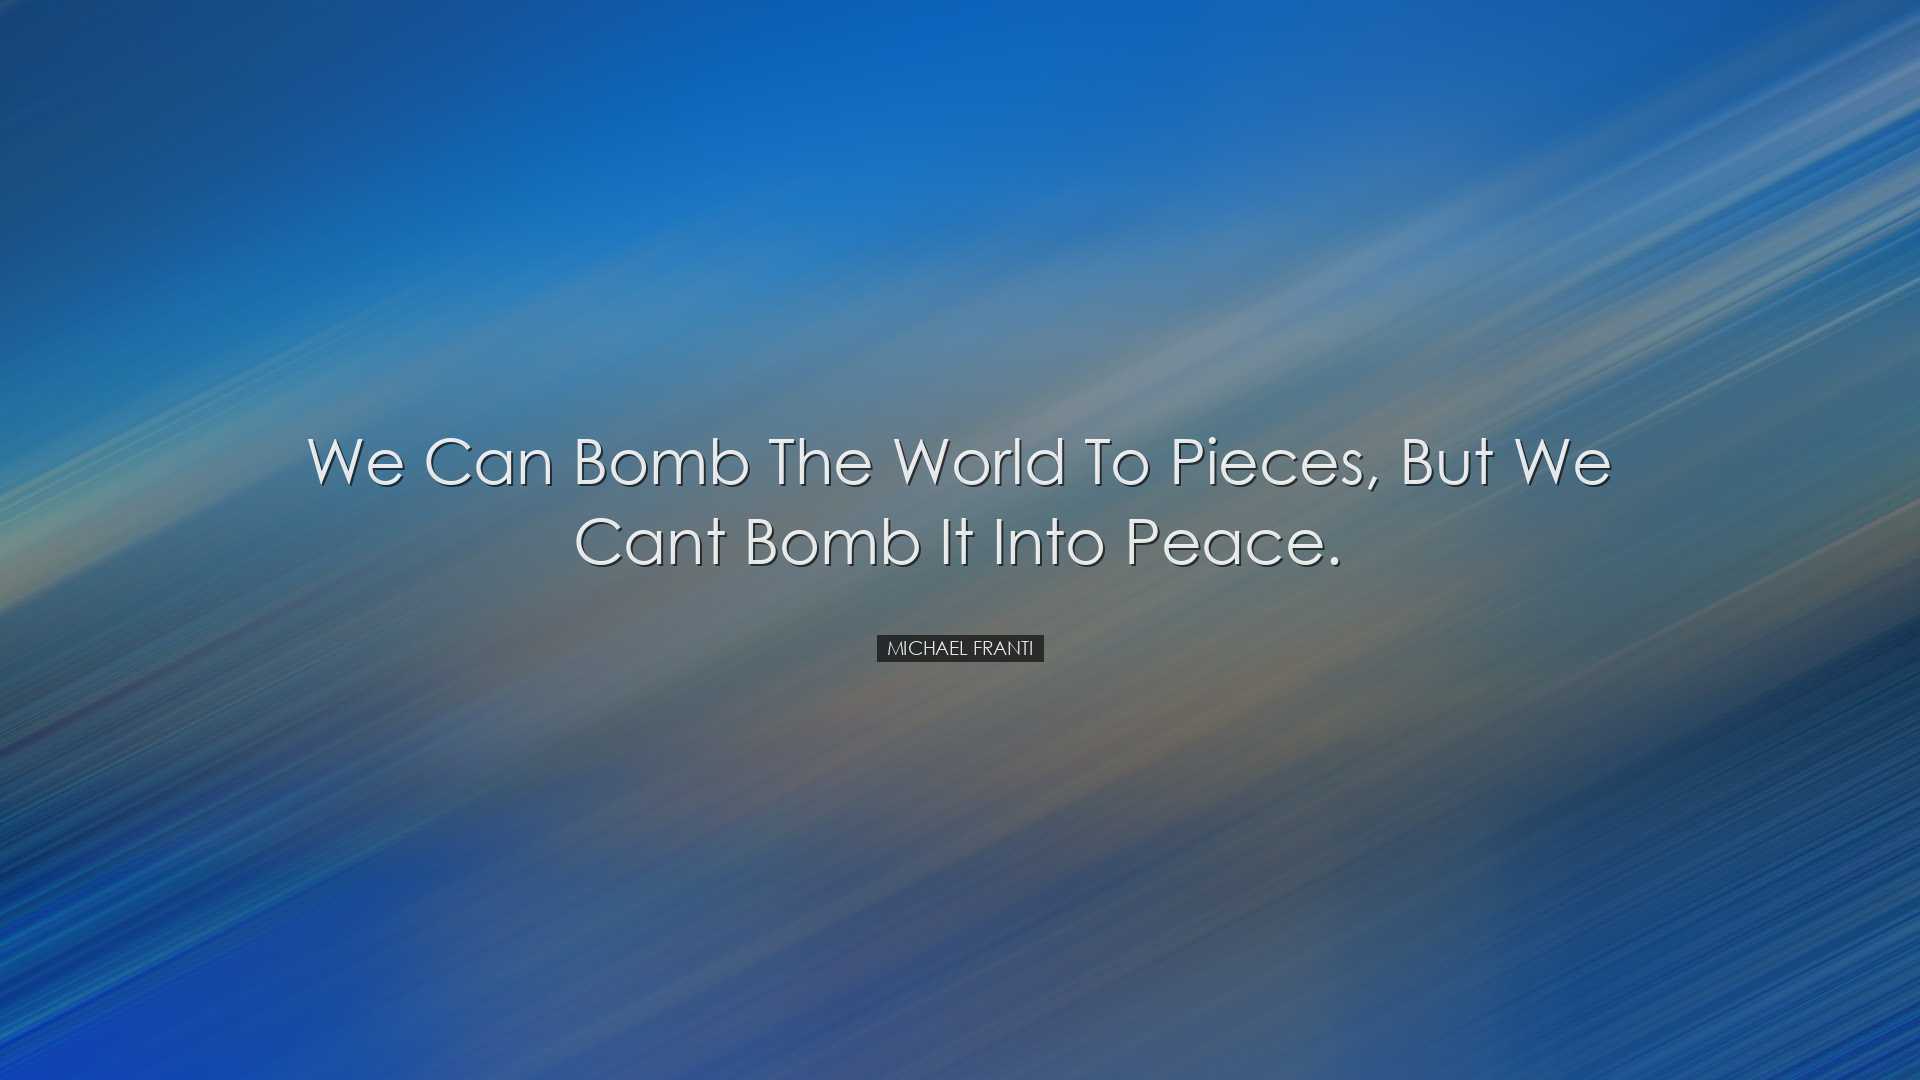 We can bomb the world to pieces, but we cant bomb it into peace. -